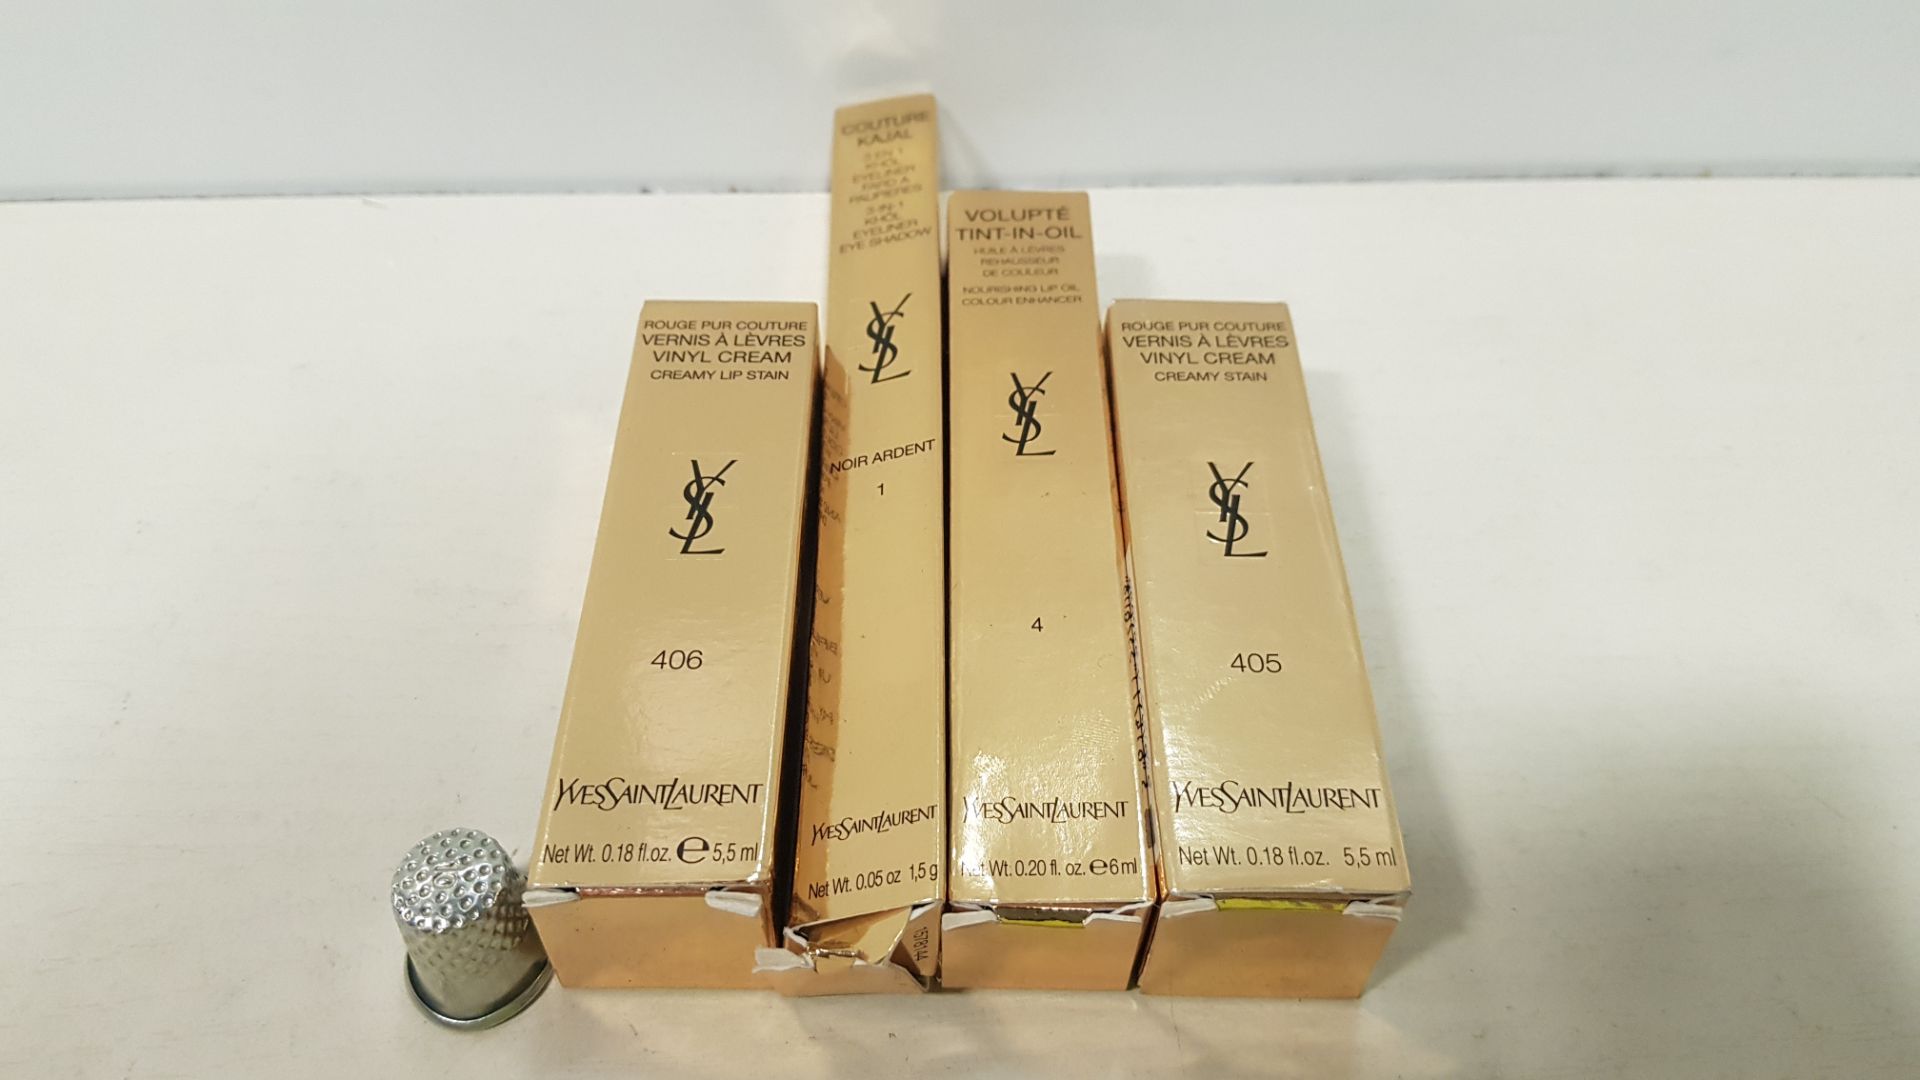 13 PIECE BRAND NEW ASSORTED YVES SAINT LAURENT LOT CONTAINING VOLUPTE TINT-IN-OIL, ROUGE PUR COUTURE